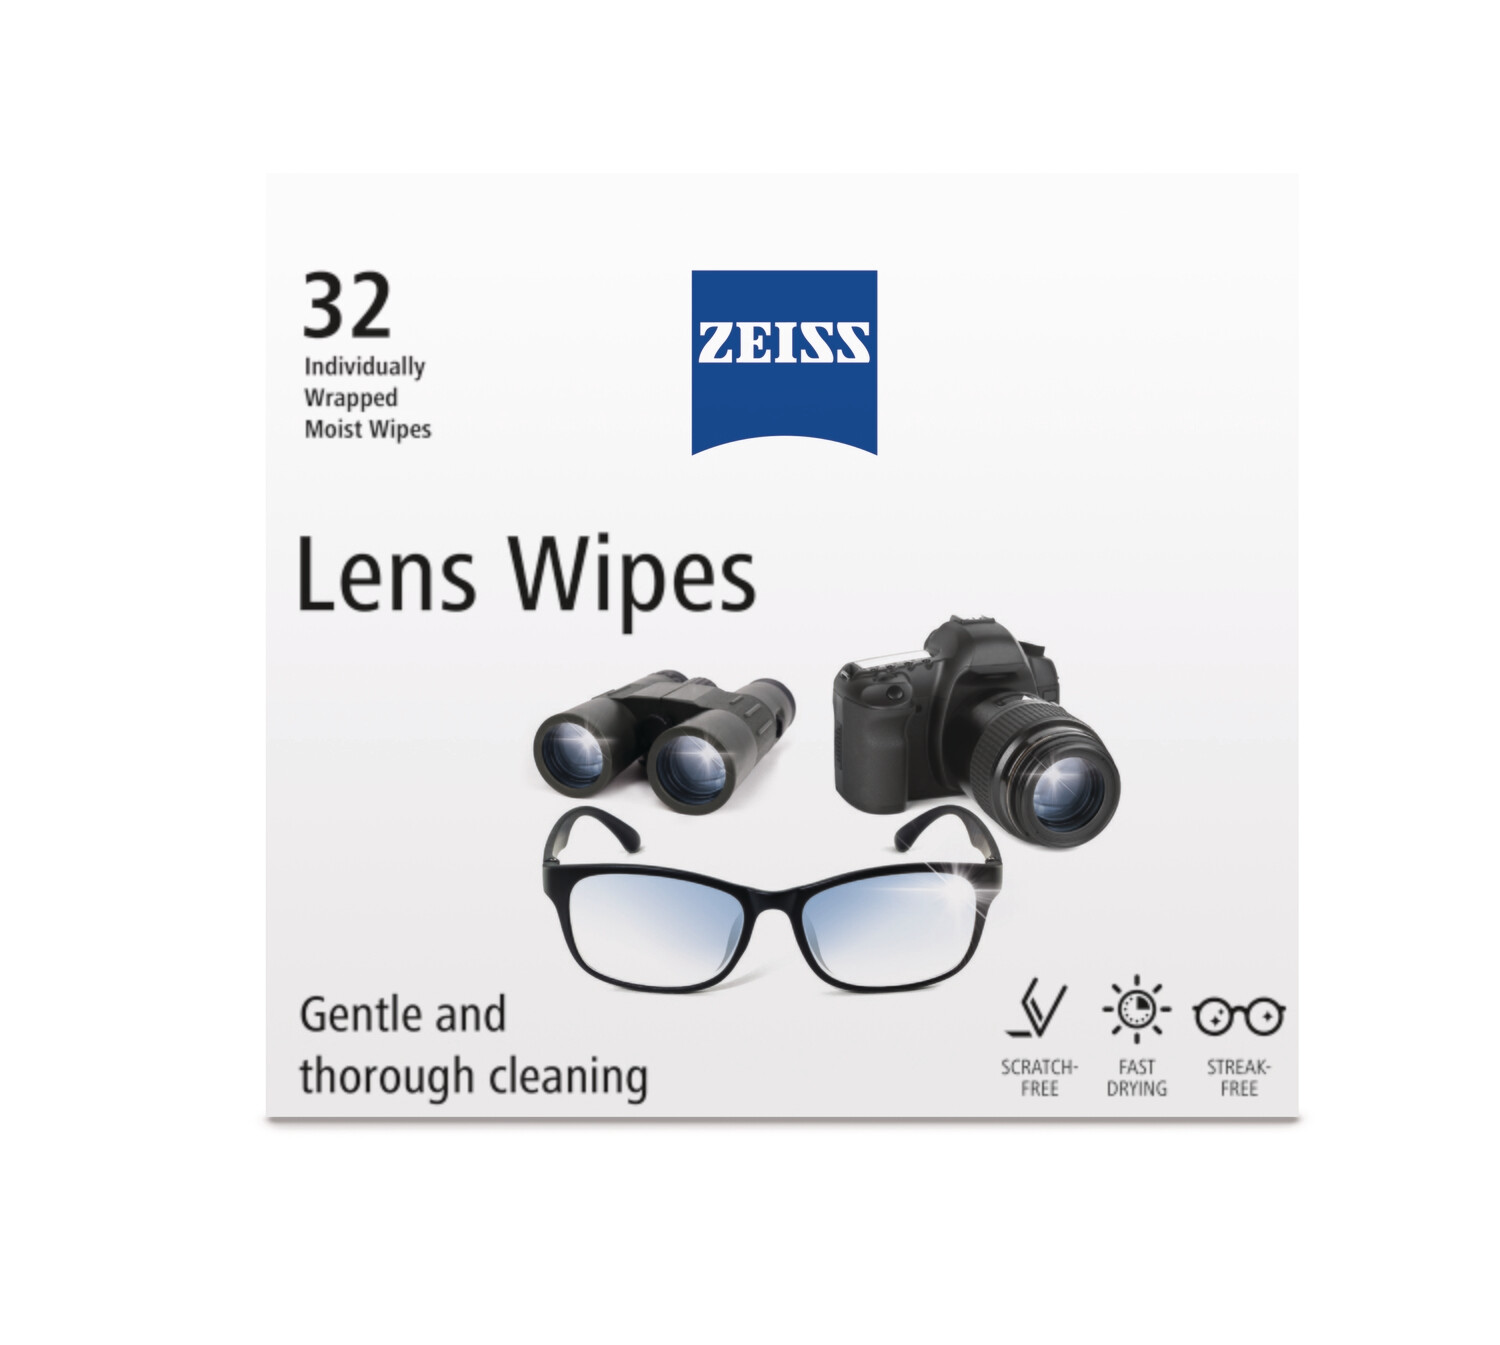 ZEISS Lens Wipes (32 wipes) incl. Delivery